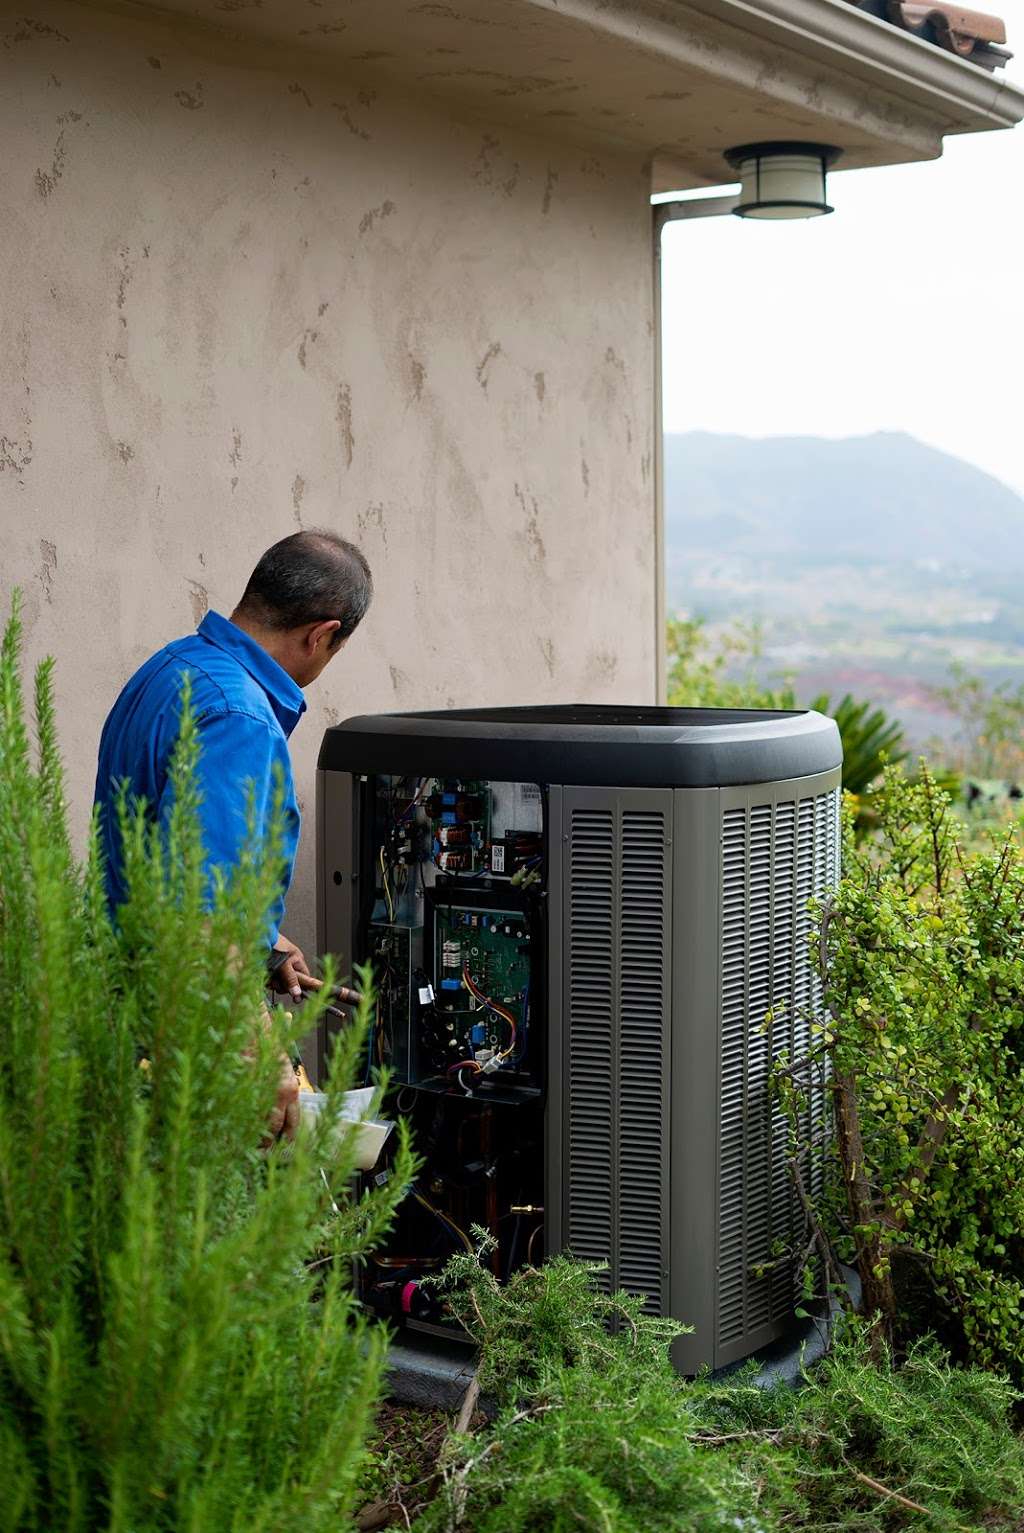 Cool Air Solutions Heating and Air Conditioning Inc. | 450 S Melrose Dr Box 53, Vista, CA 92081, USA | Phone: (760) 689-1486